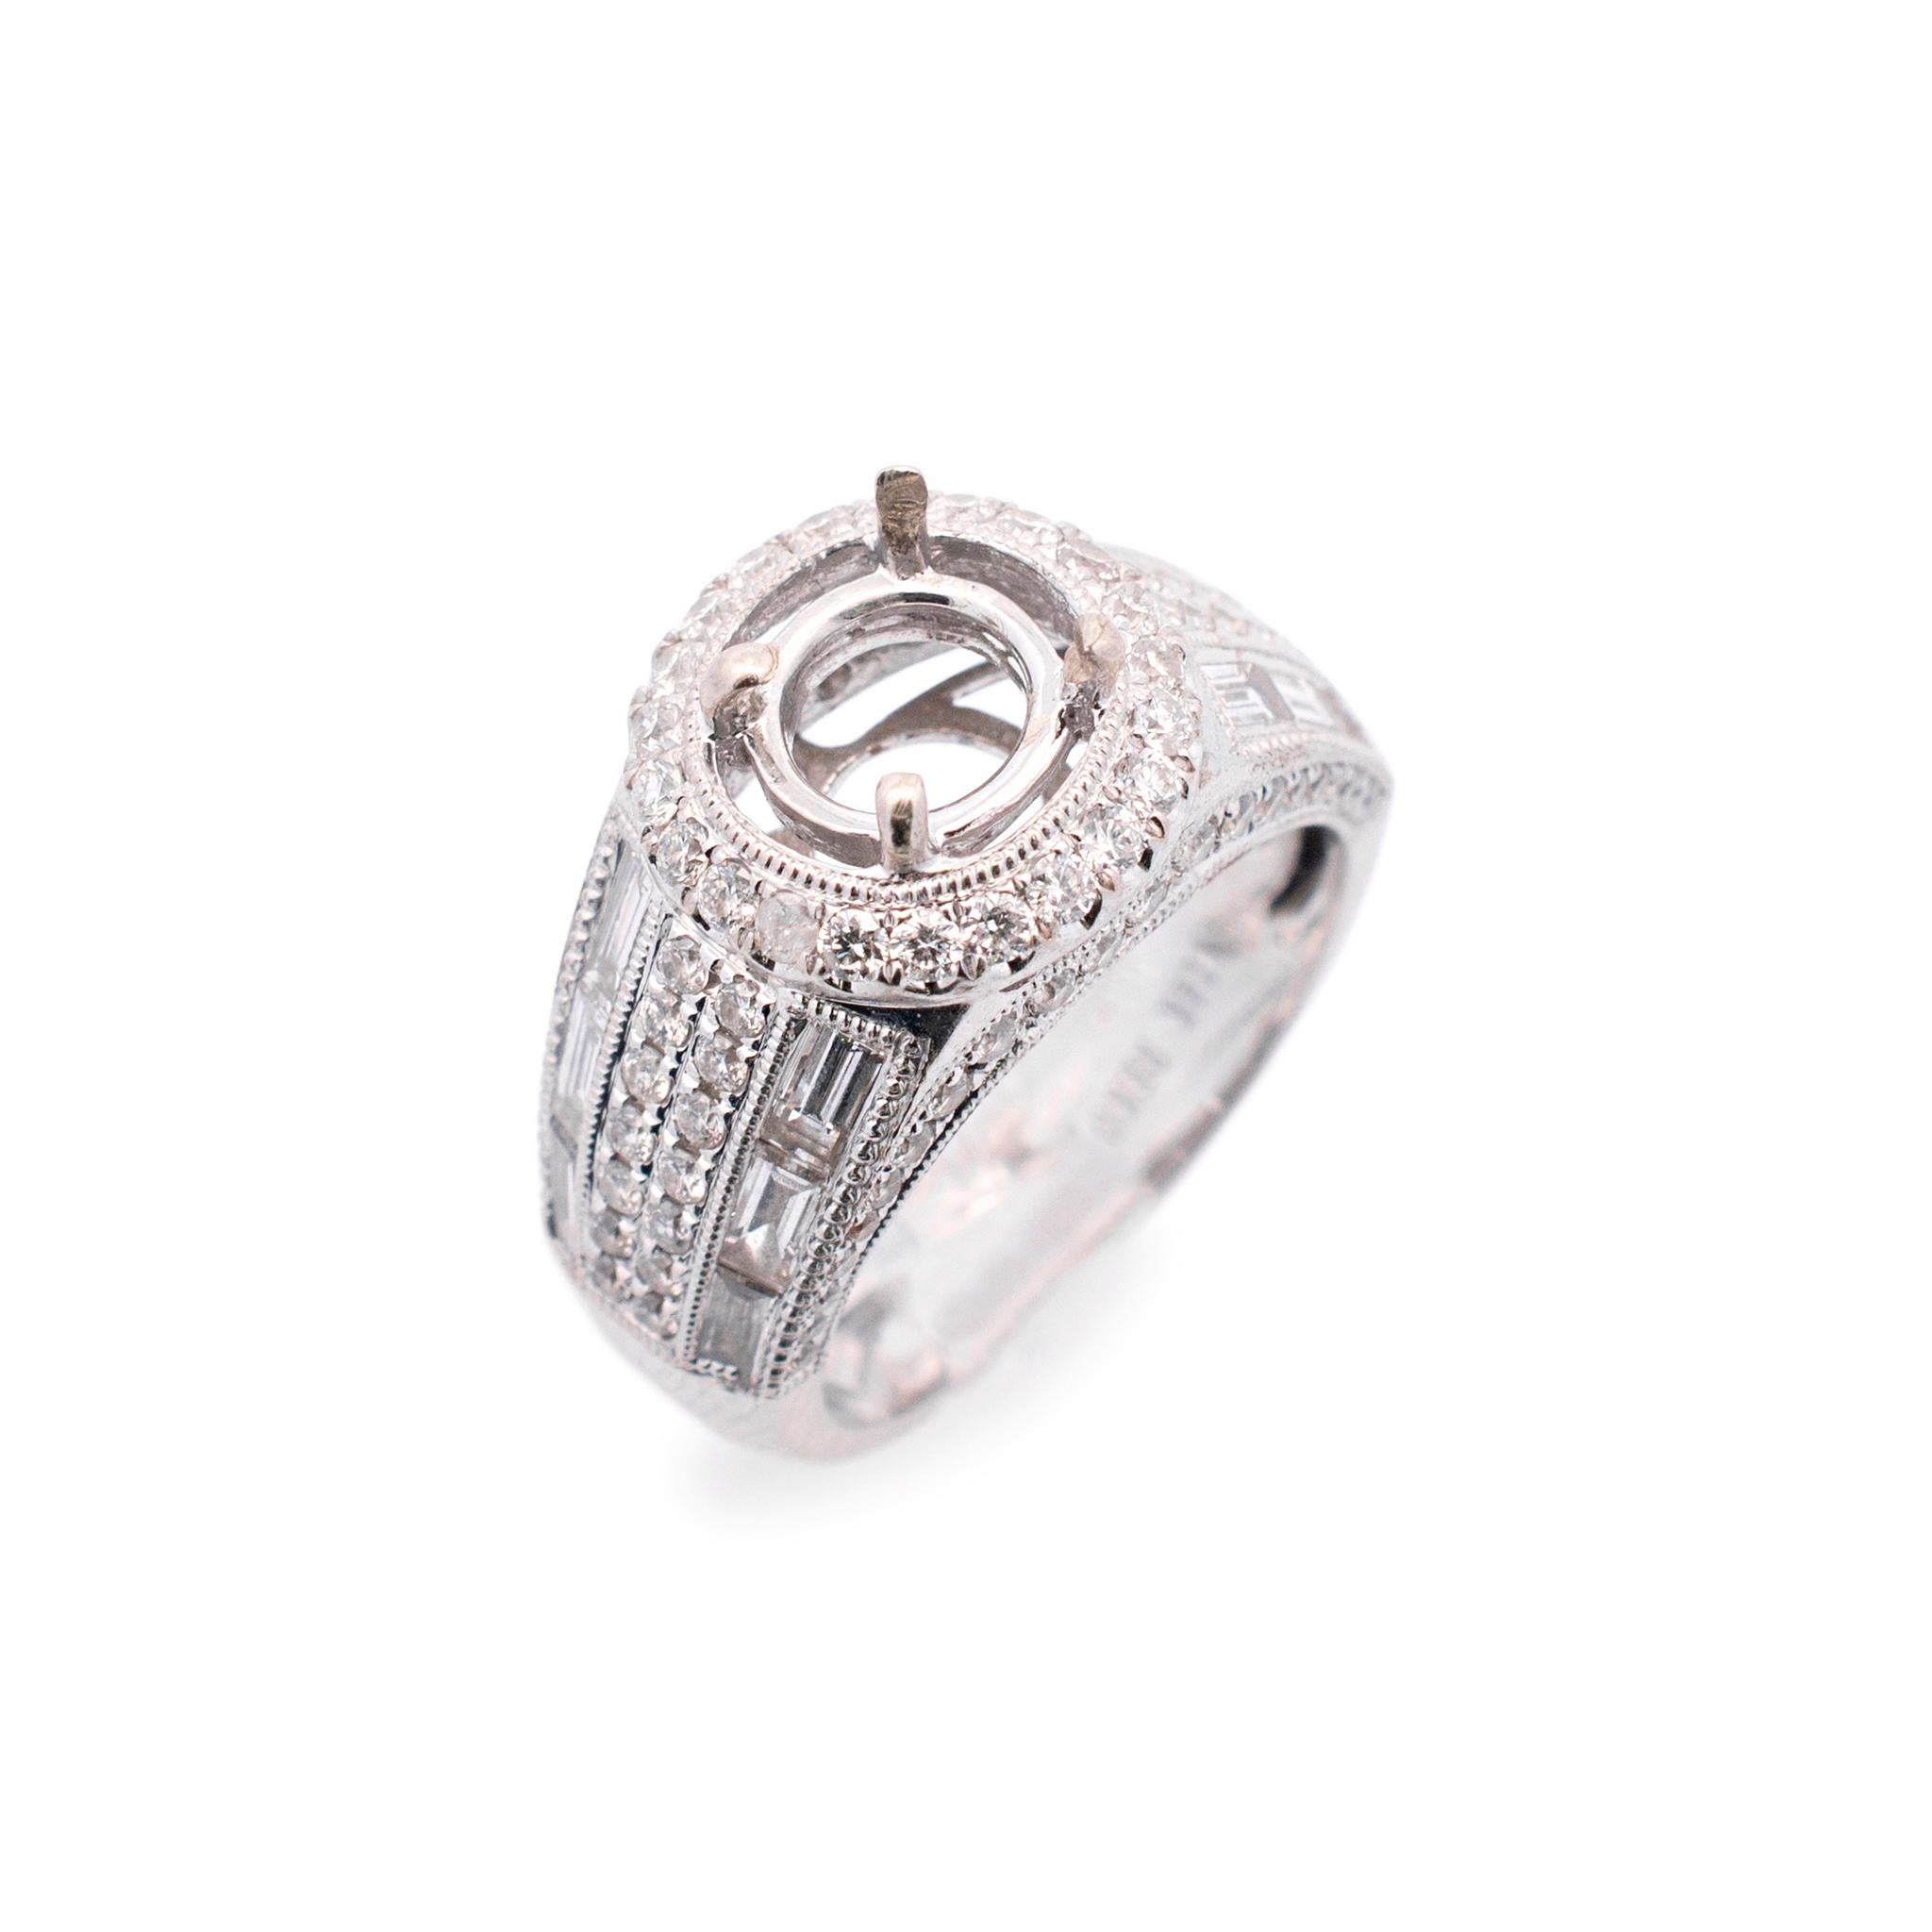 Brand: Reko

Gender: Ladies

Metal Type: 14K White Gold

Size (US): 5

Shank Width: 9.40mm Tapering to 3.80mm

Head Measurements: 11.50mm by 11.20mm

Can Hold a center stone of Round Shape measures approximately 6.50mm to 7.00mm in diameter

Weight: